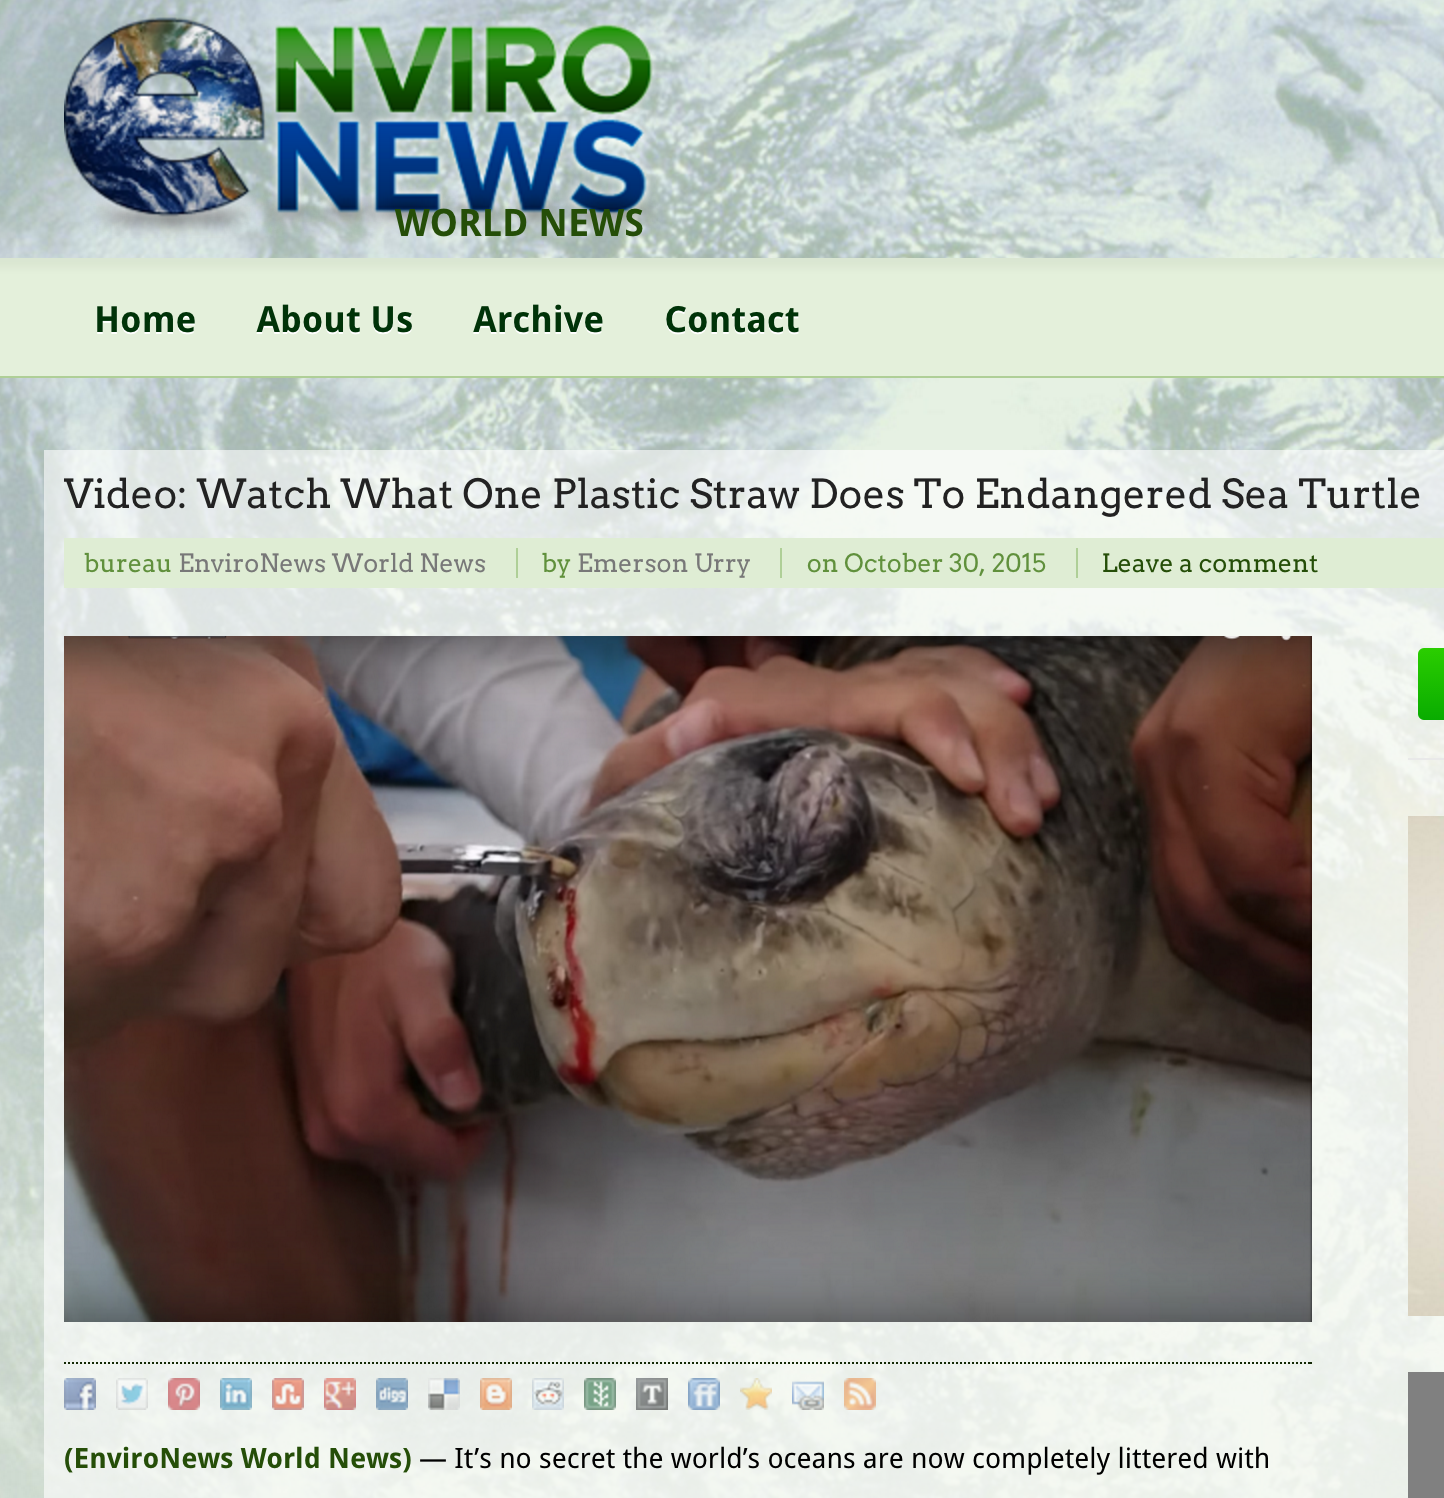 EnviroNews Headline: Watch What One Plastic Straw Does To Endangered Sea Turtle